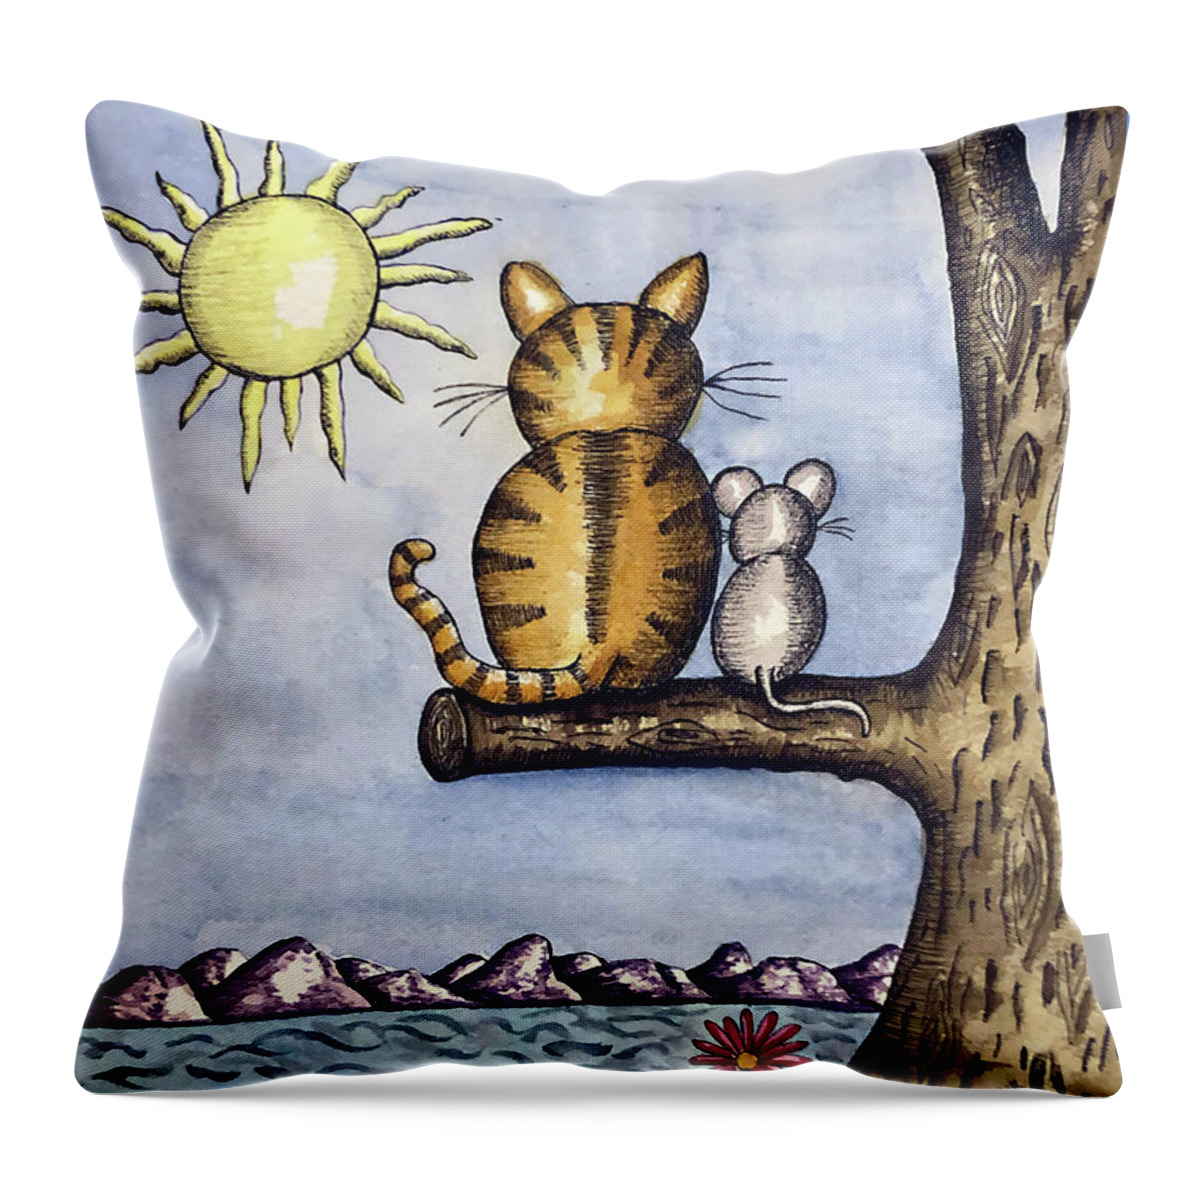 Childrens Art Throw Pillow featuring the painting Cat Mouse Sun by Christina Wedberg